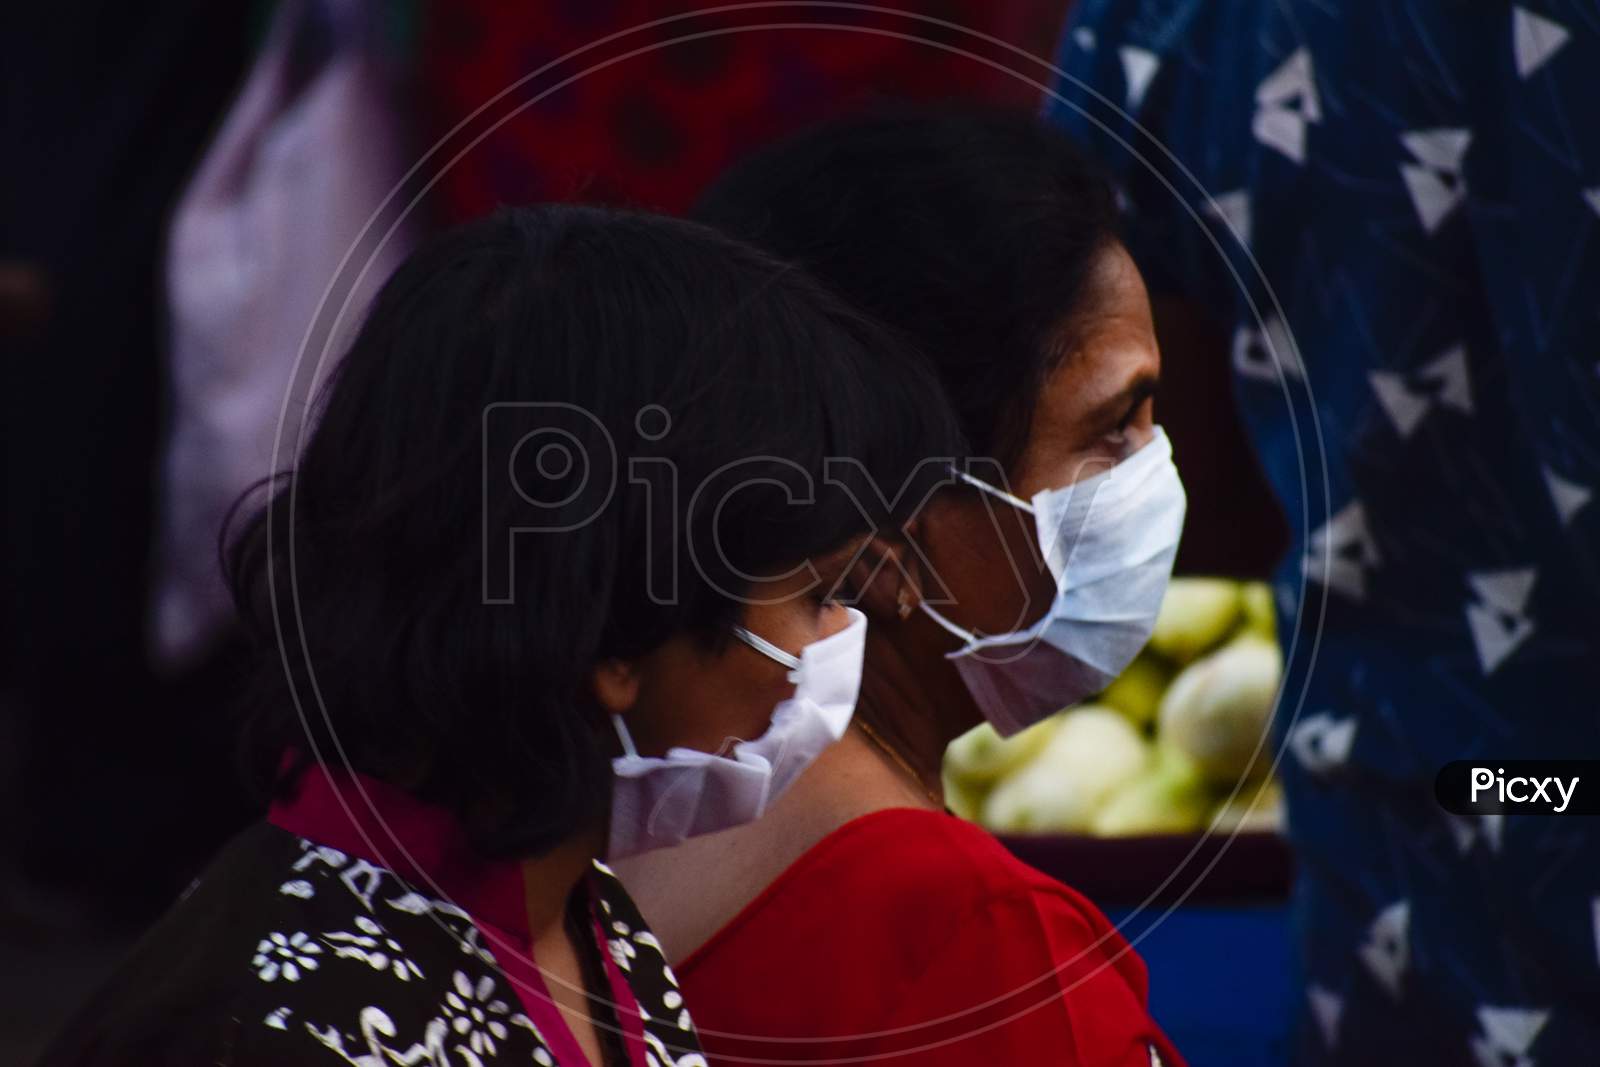 People wearing medical mask as safety, prevention and protection from Covid 19 Corona Virus at market place in lockdown 4. Men's and women's with children and old buying and selling vegetables. Crowded public place. No social distancing. Covid 19 Corona Virus pandemic.